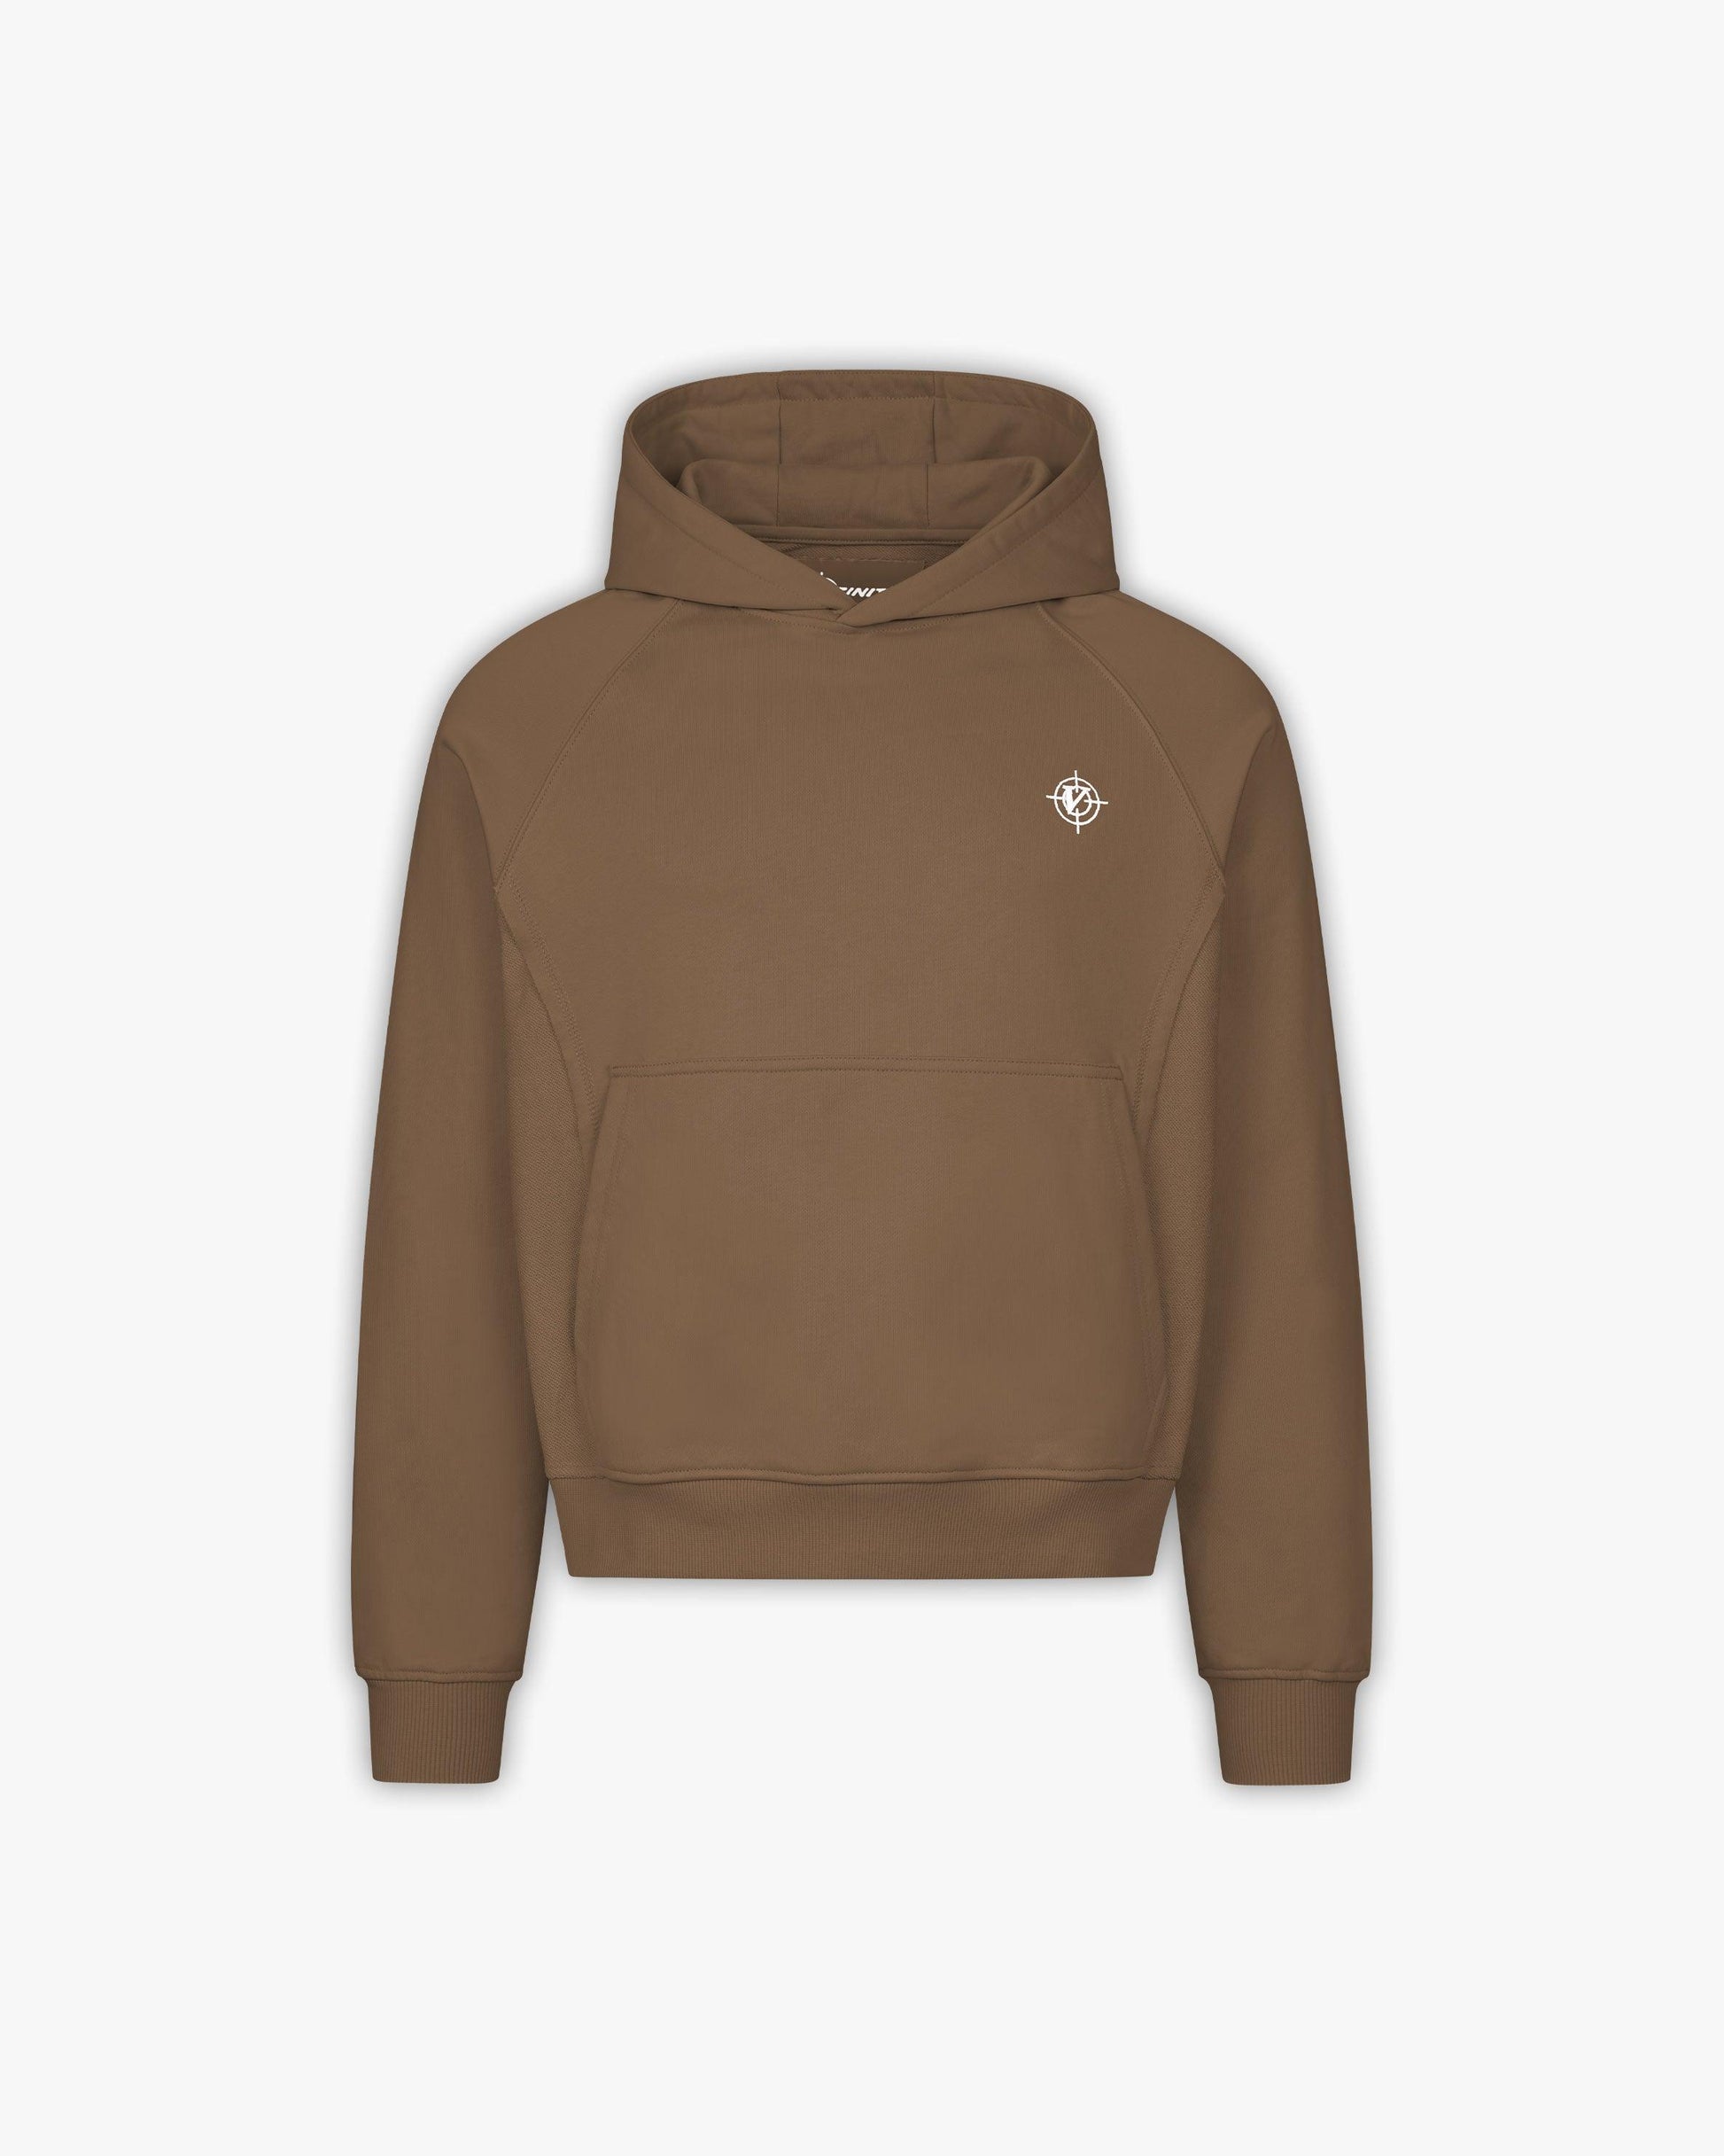 INSIDE OUT HOODIE CHOCOLATE BROWN - VICINITY